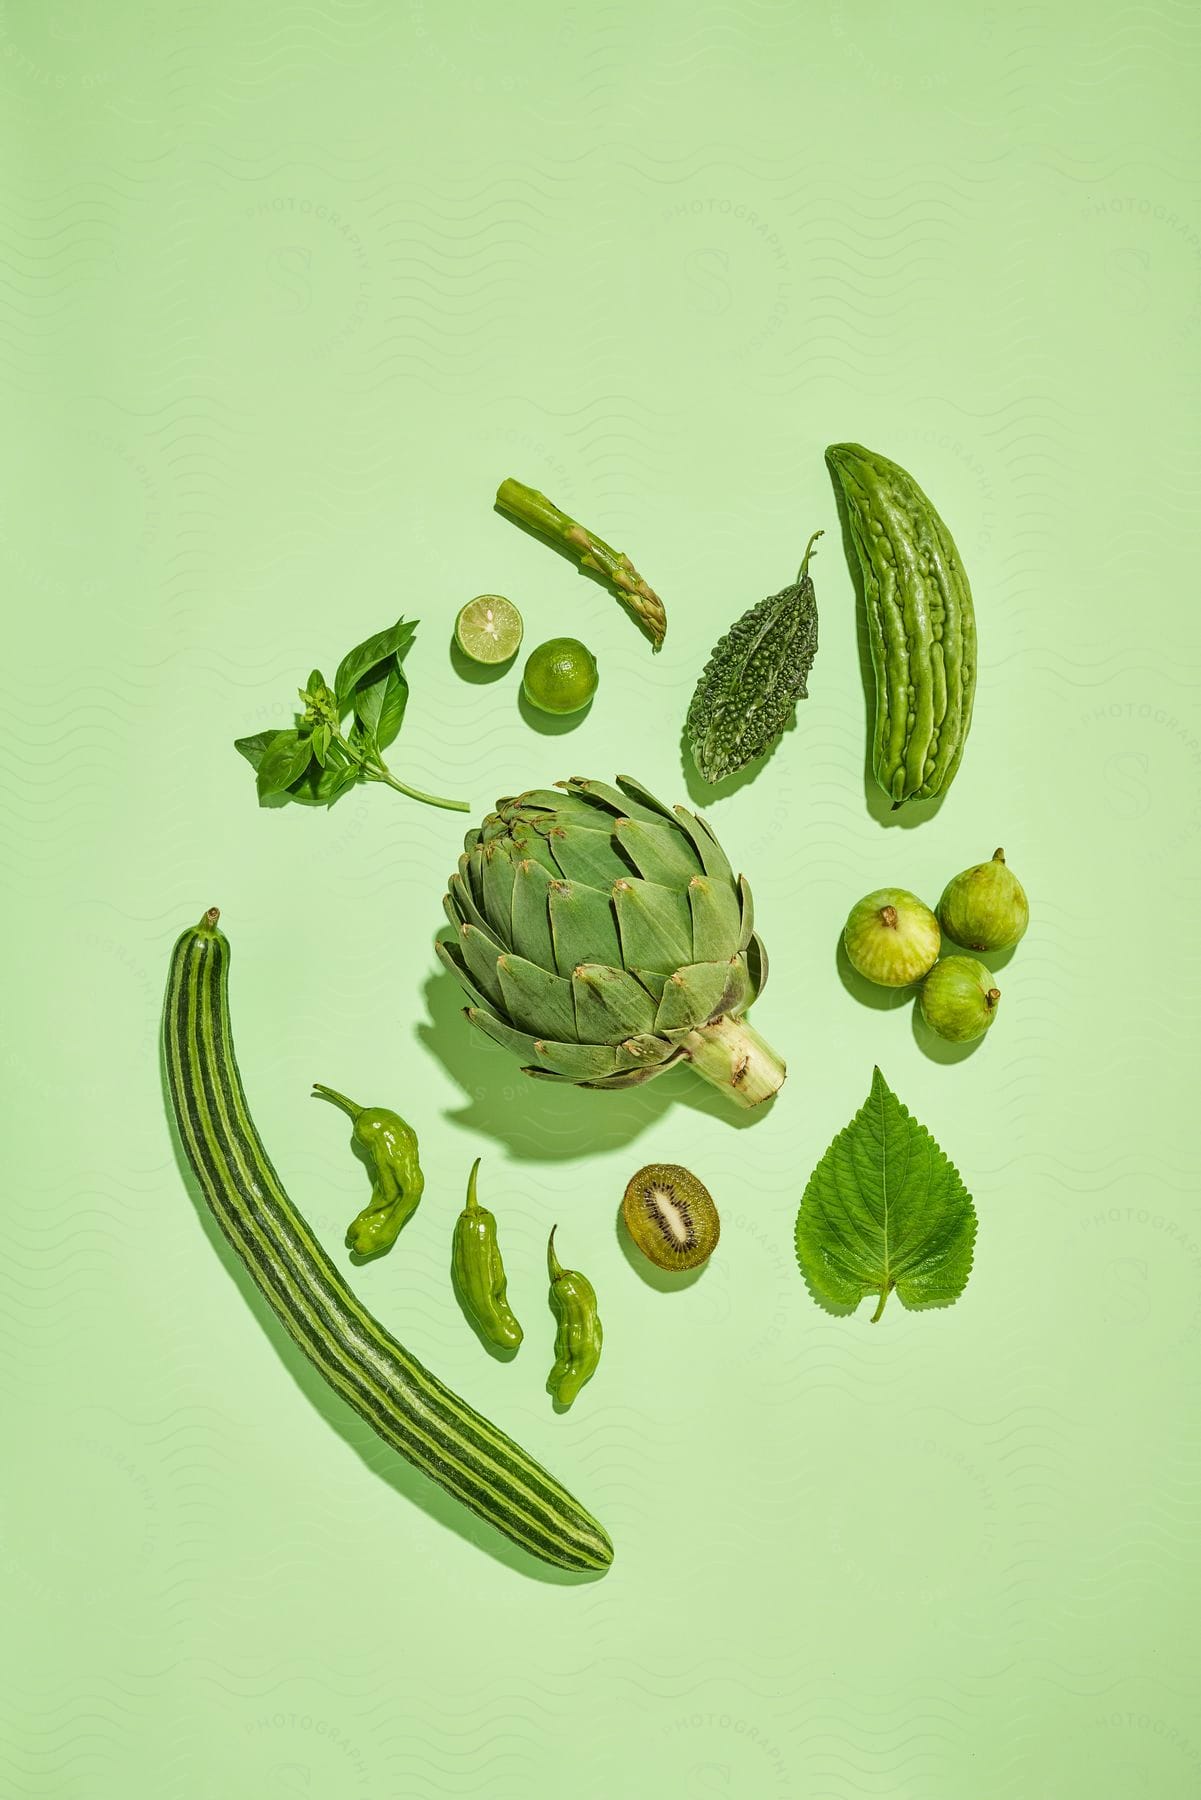 Stock photo of green produce and fruits arranged on a green background shot from above